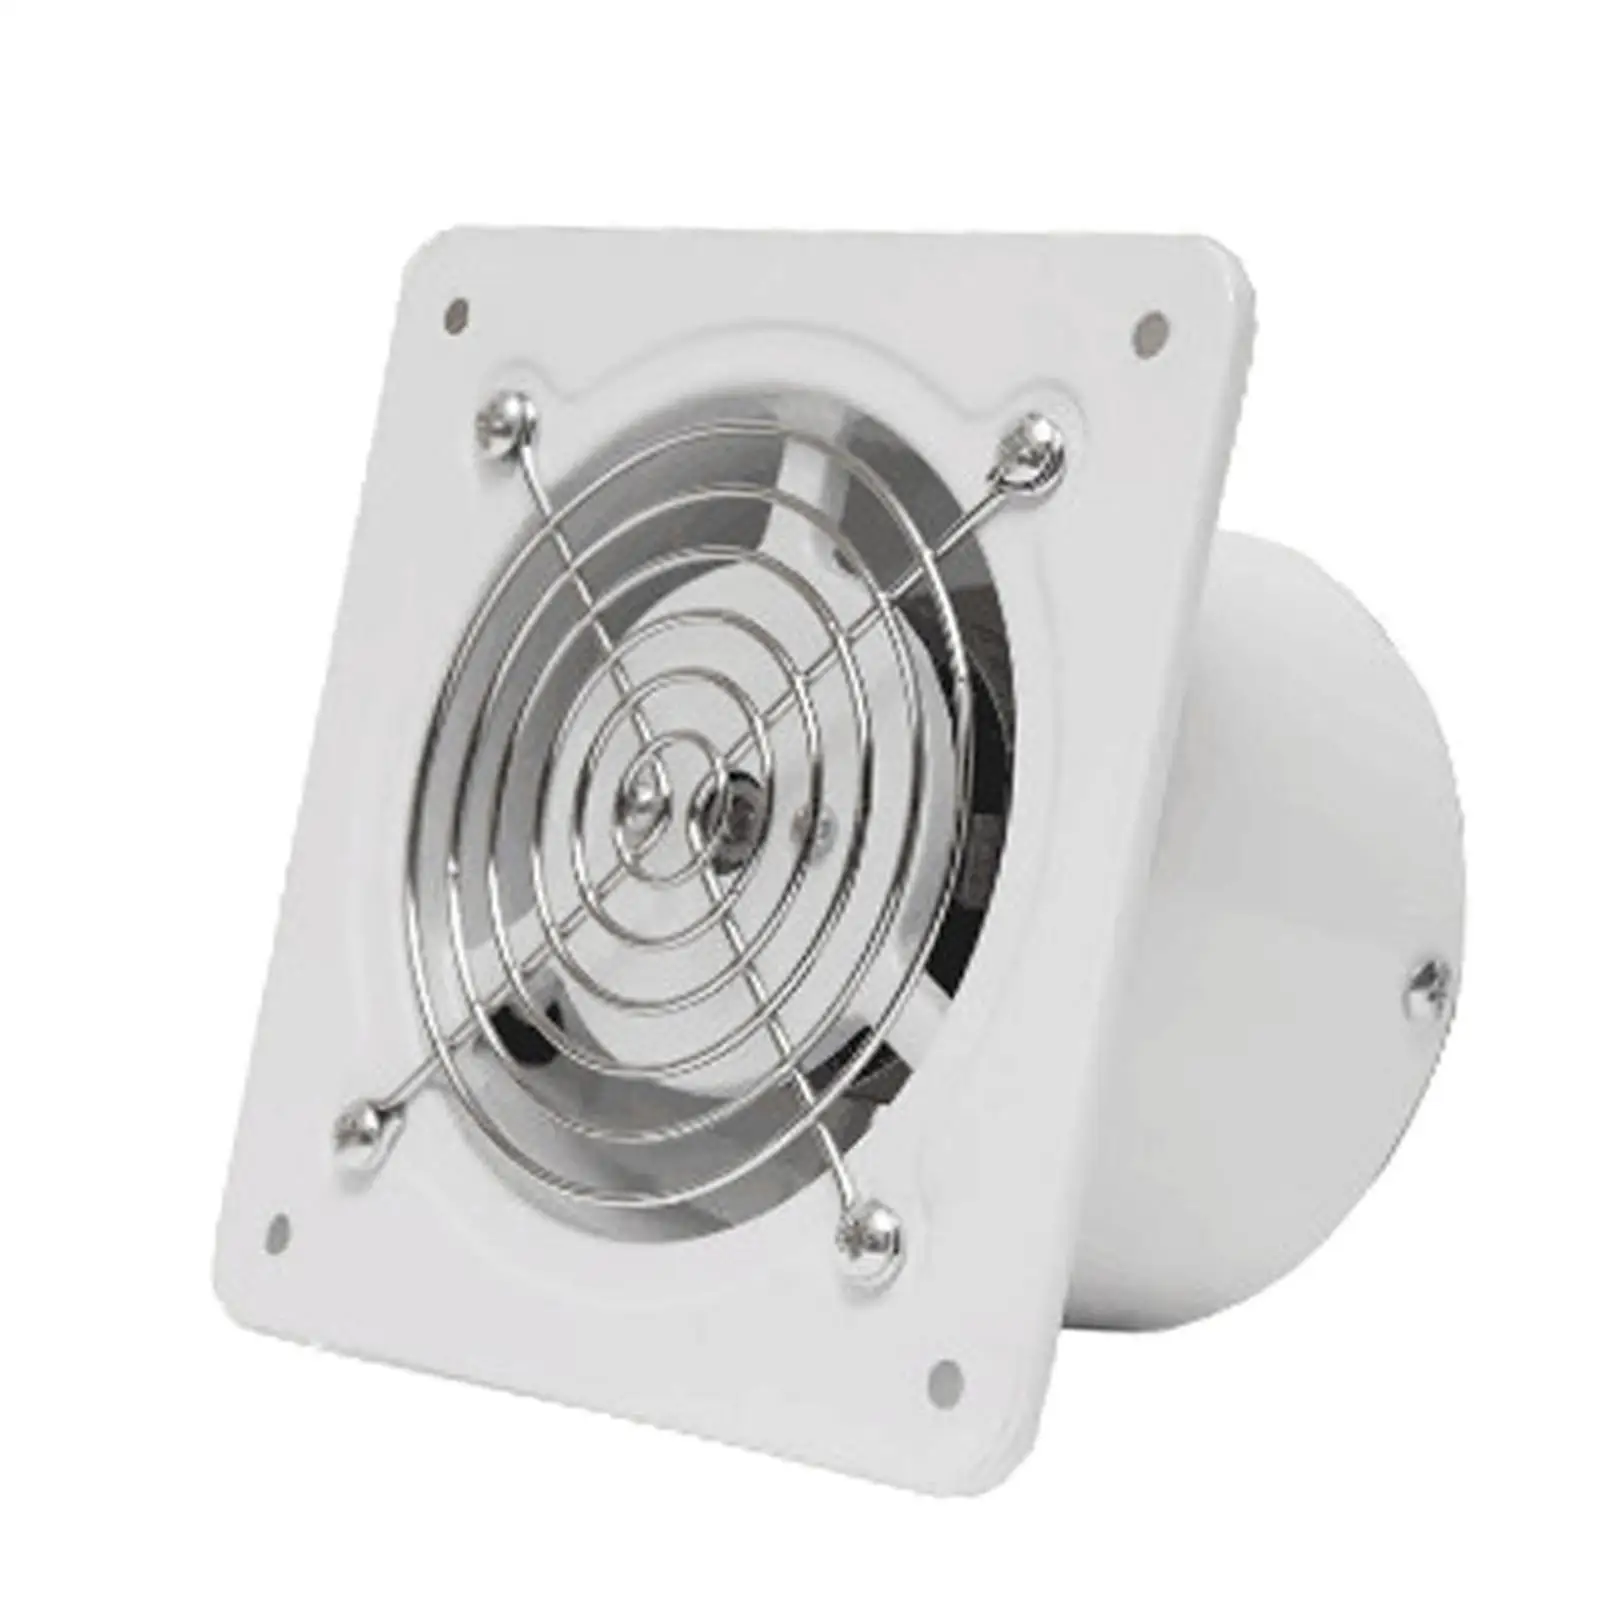 4 inch Exhaust Fan Through Wall Installation Extractor Ventilation Fan High Speed for Window Attic Kitchen Laundry Room